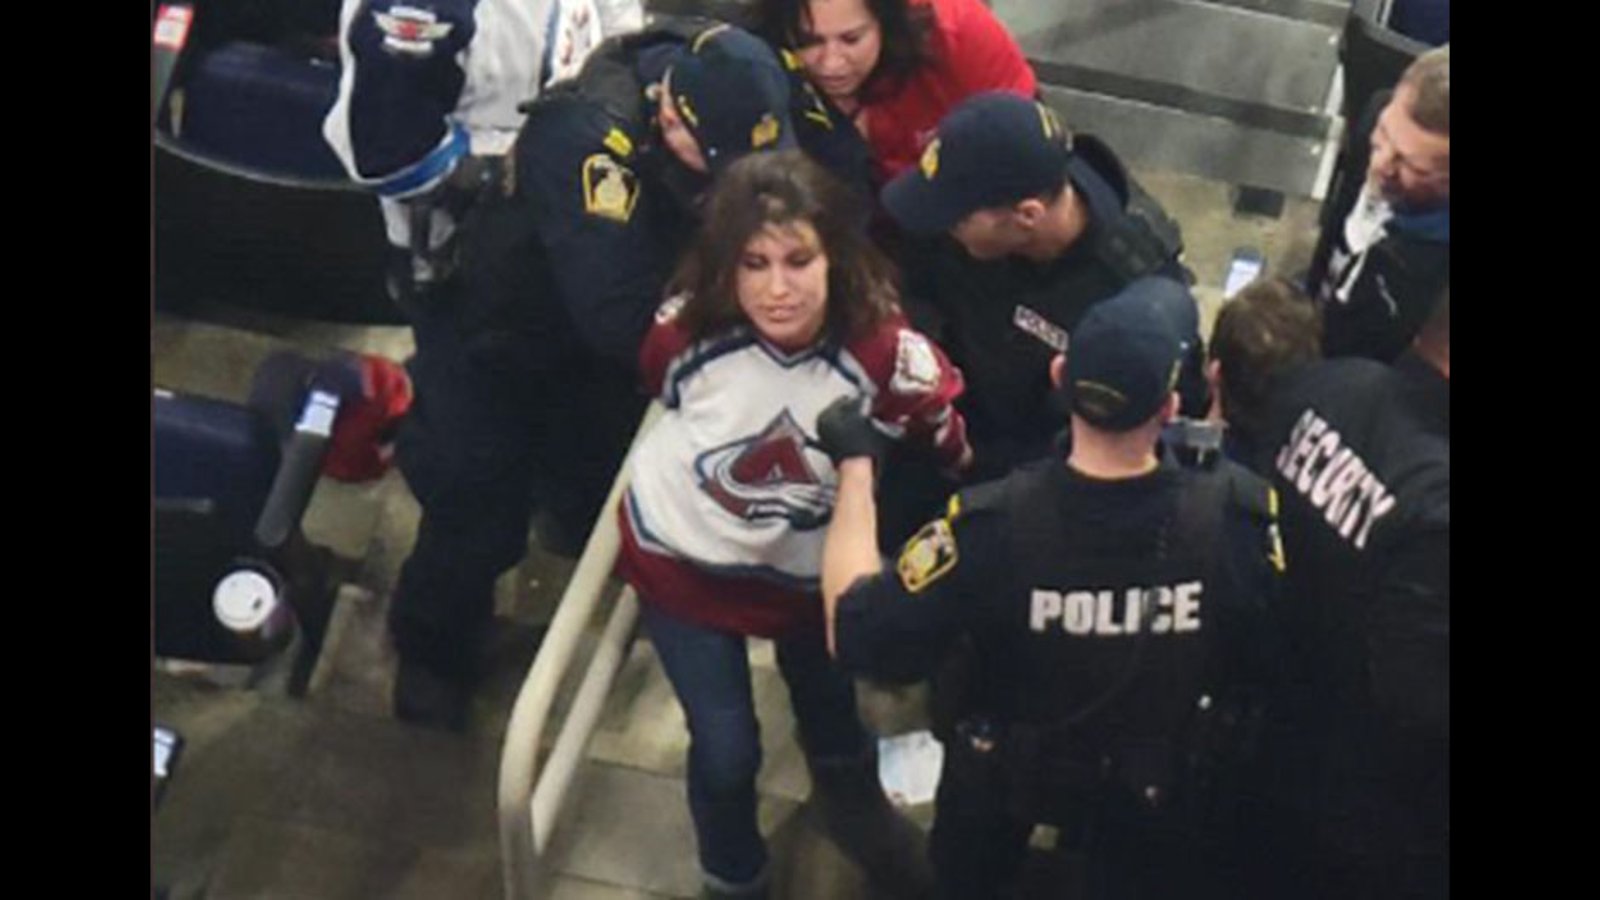 Female Avs fan knocks out Jets fan, leaves him bloodied and then cackles while being hauled off in cuffs